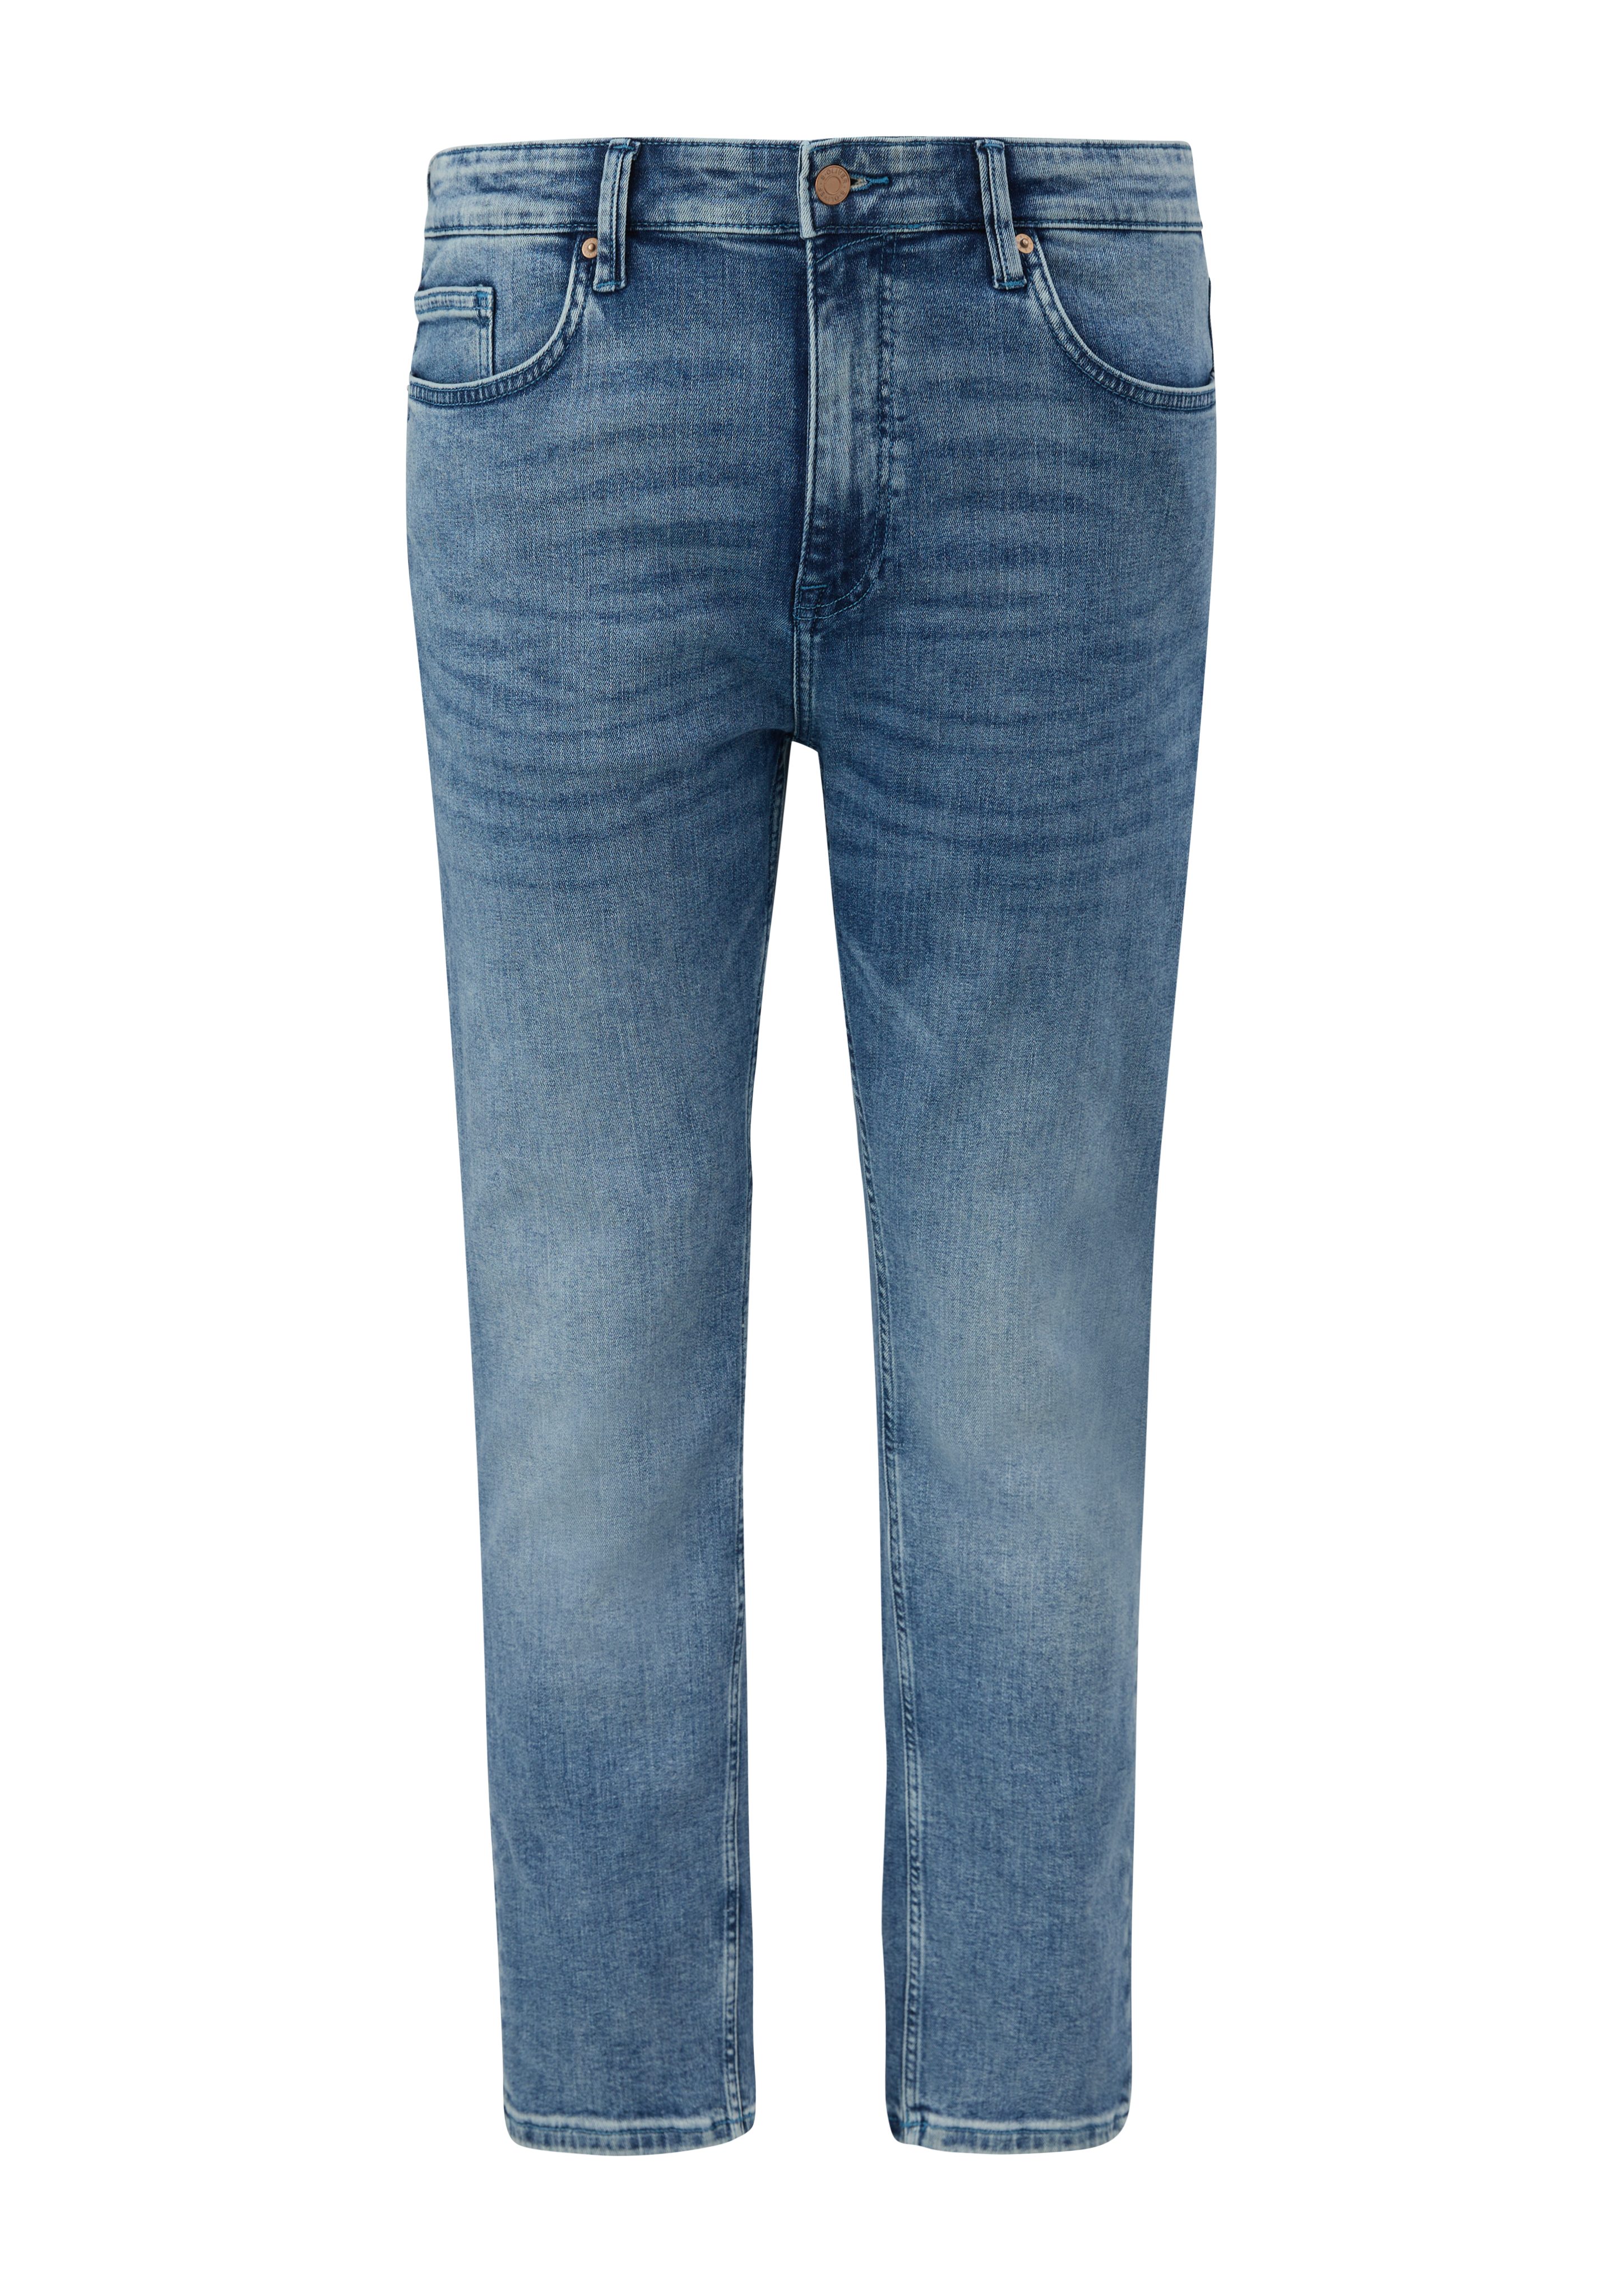 / Relaxed / blau Fit Straight Stoffhose Casby Mid s.Oliver Leg Rise / Jeans